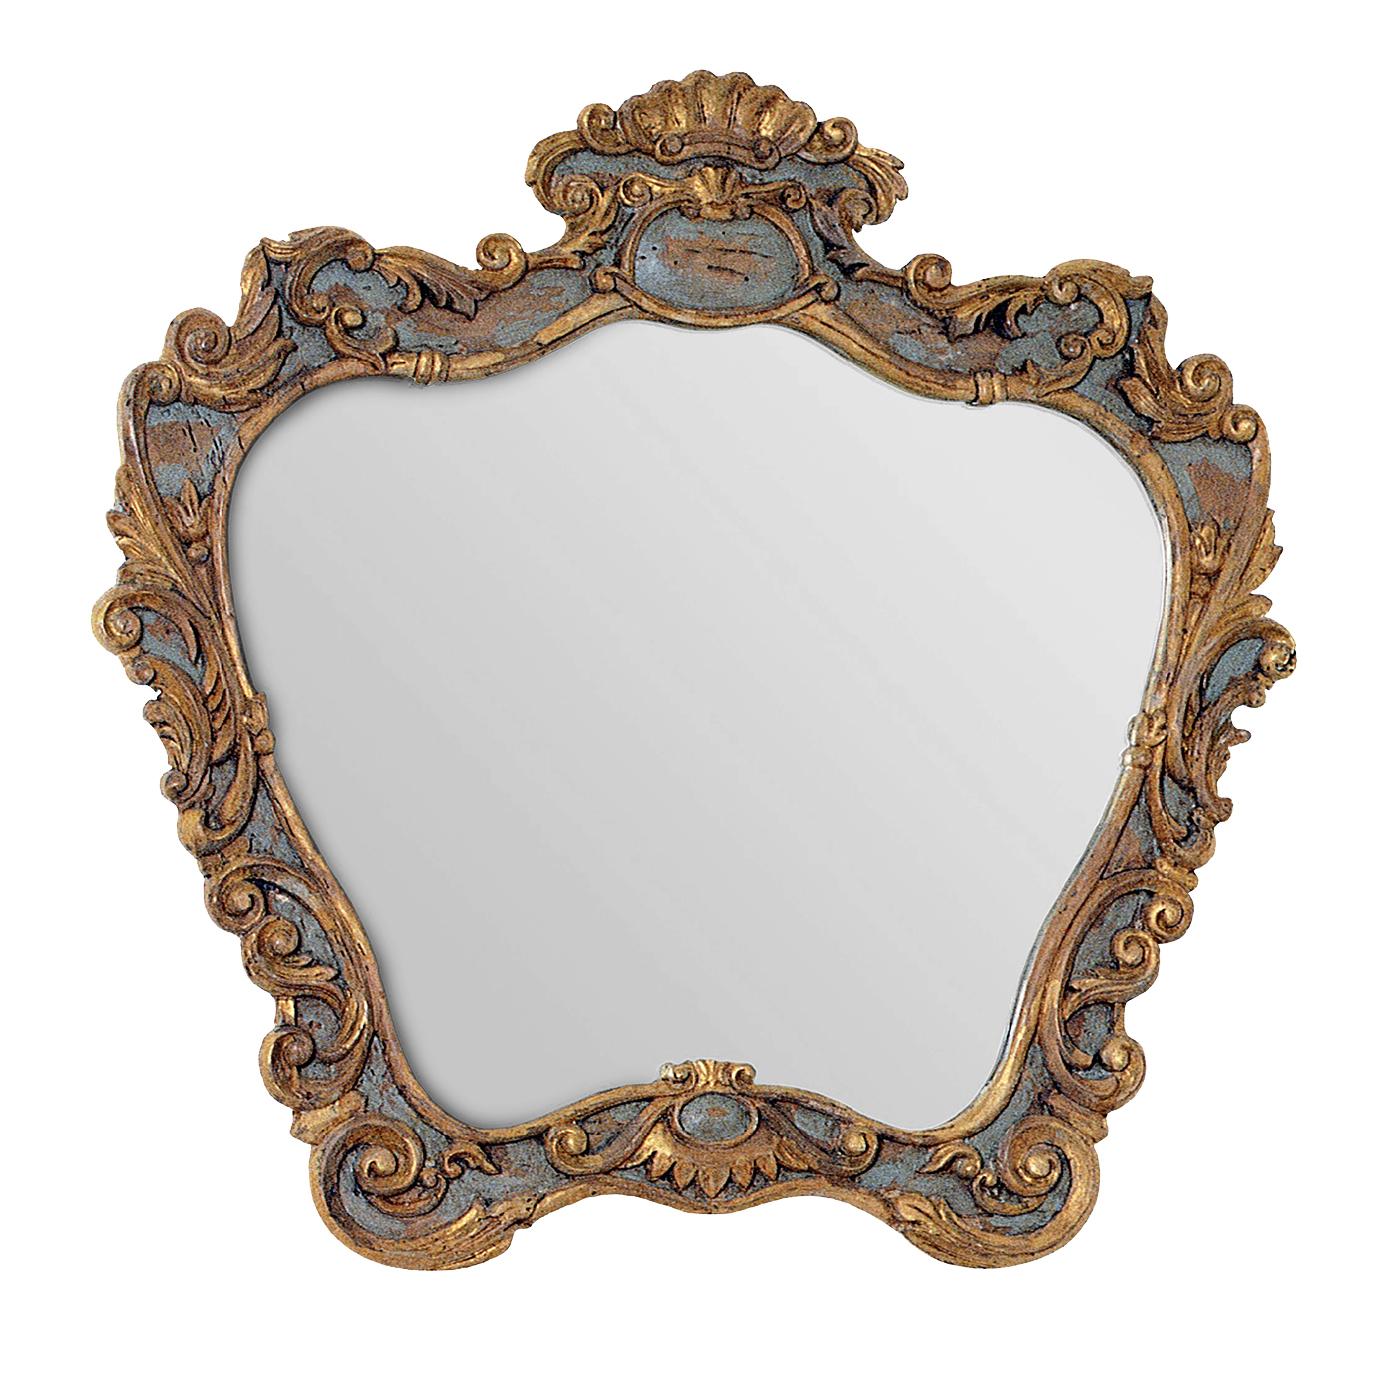 An ode to 18th century furniture, this mirror is an exquisite example of masterful craftsmanship. The frame is in solid wood that was carved by hand and finished with an antique-like treatment and a combination of a traditional grey-blue color